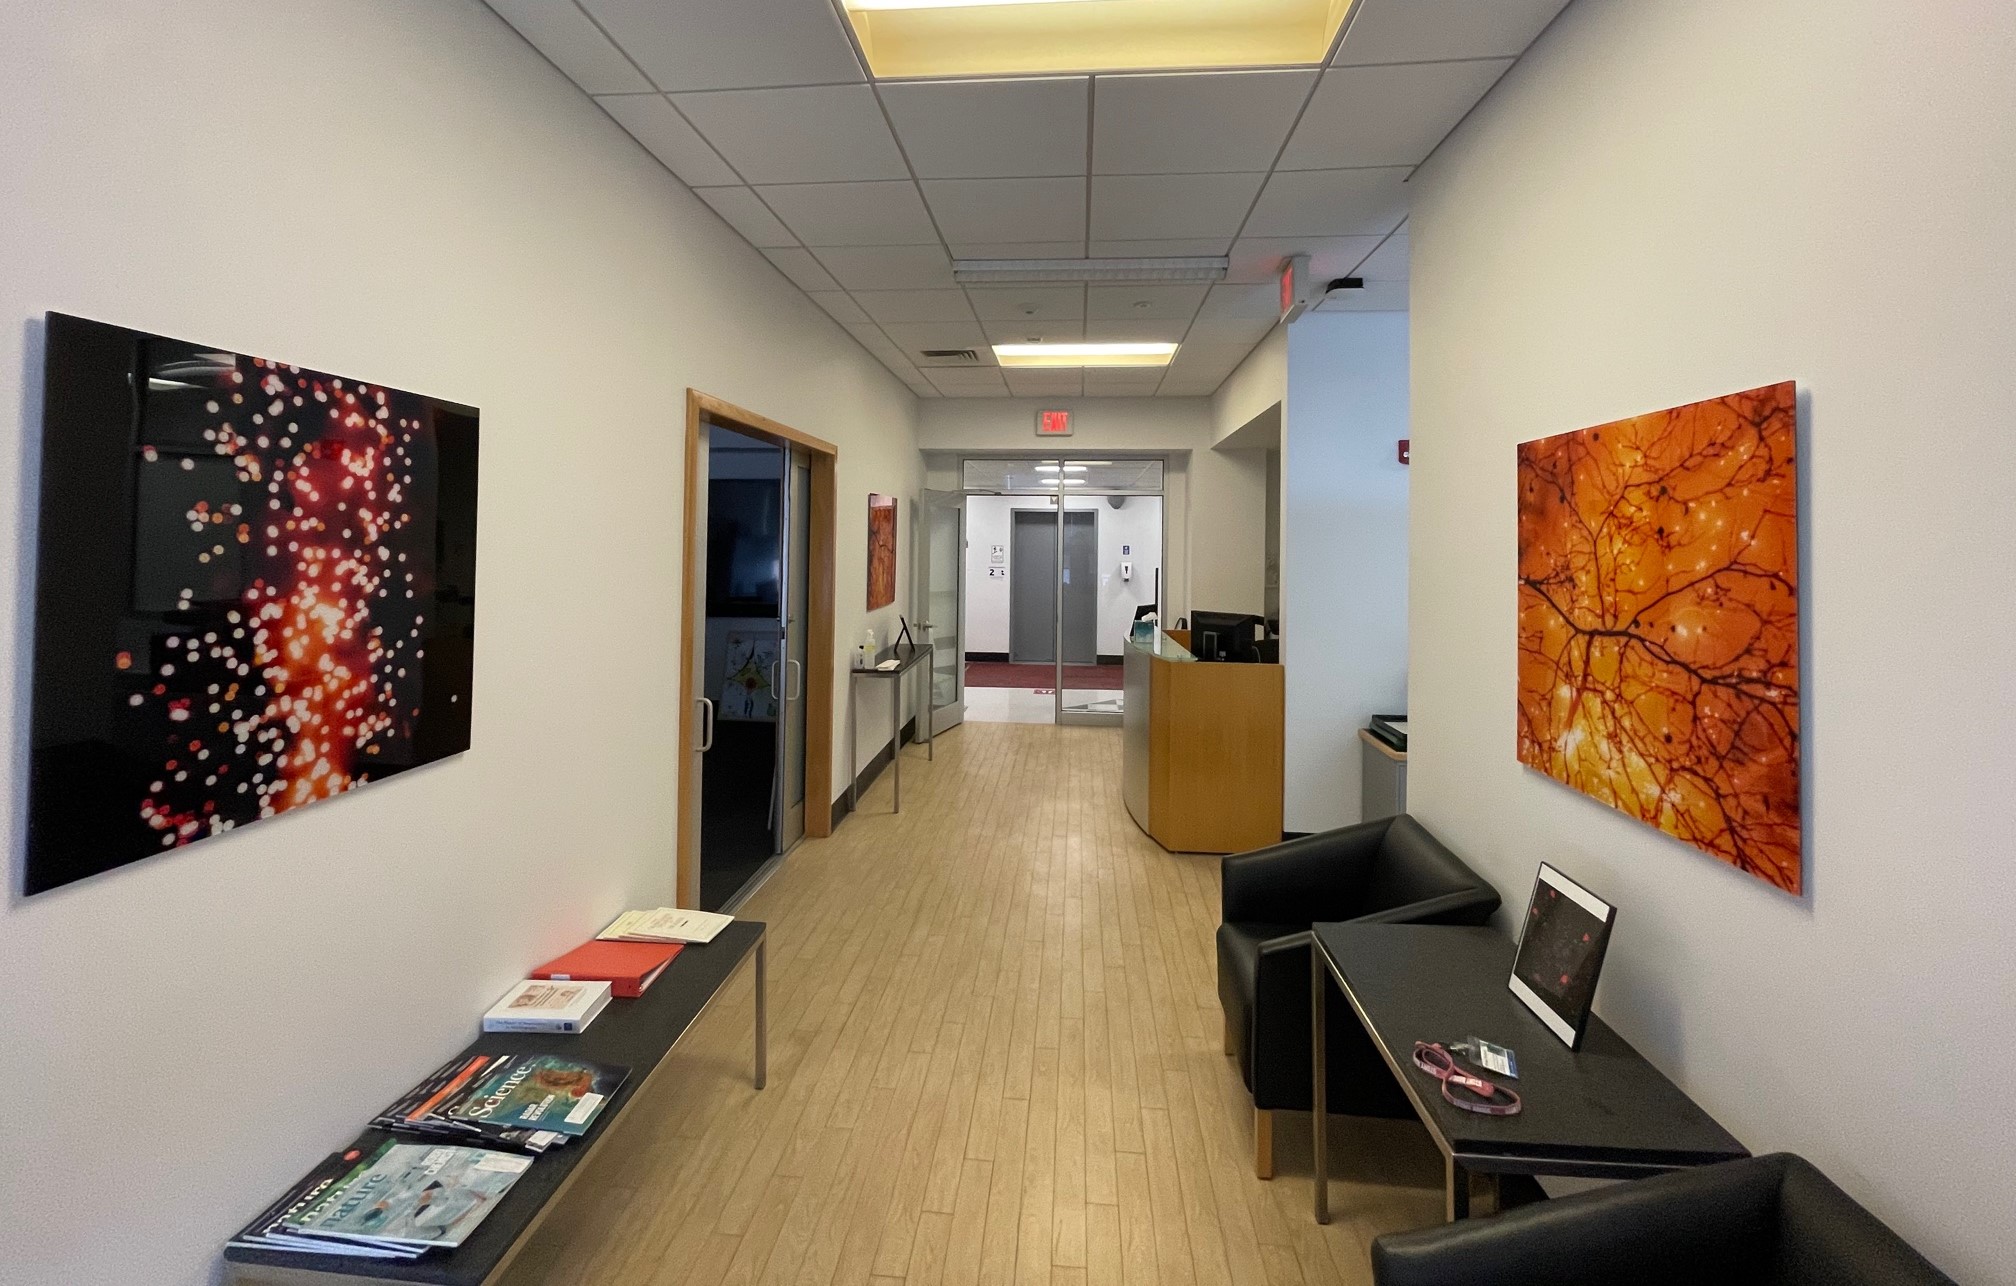 View of an office hallway with long tables on each side and orange and black images that look like neurons on each wall. The front door is at the end of the hallway, in the middle of the photo.